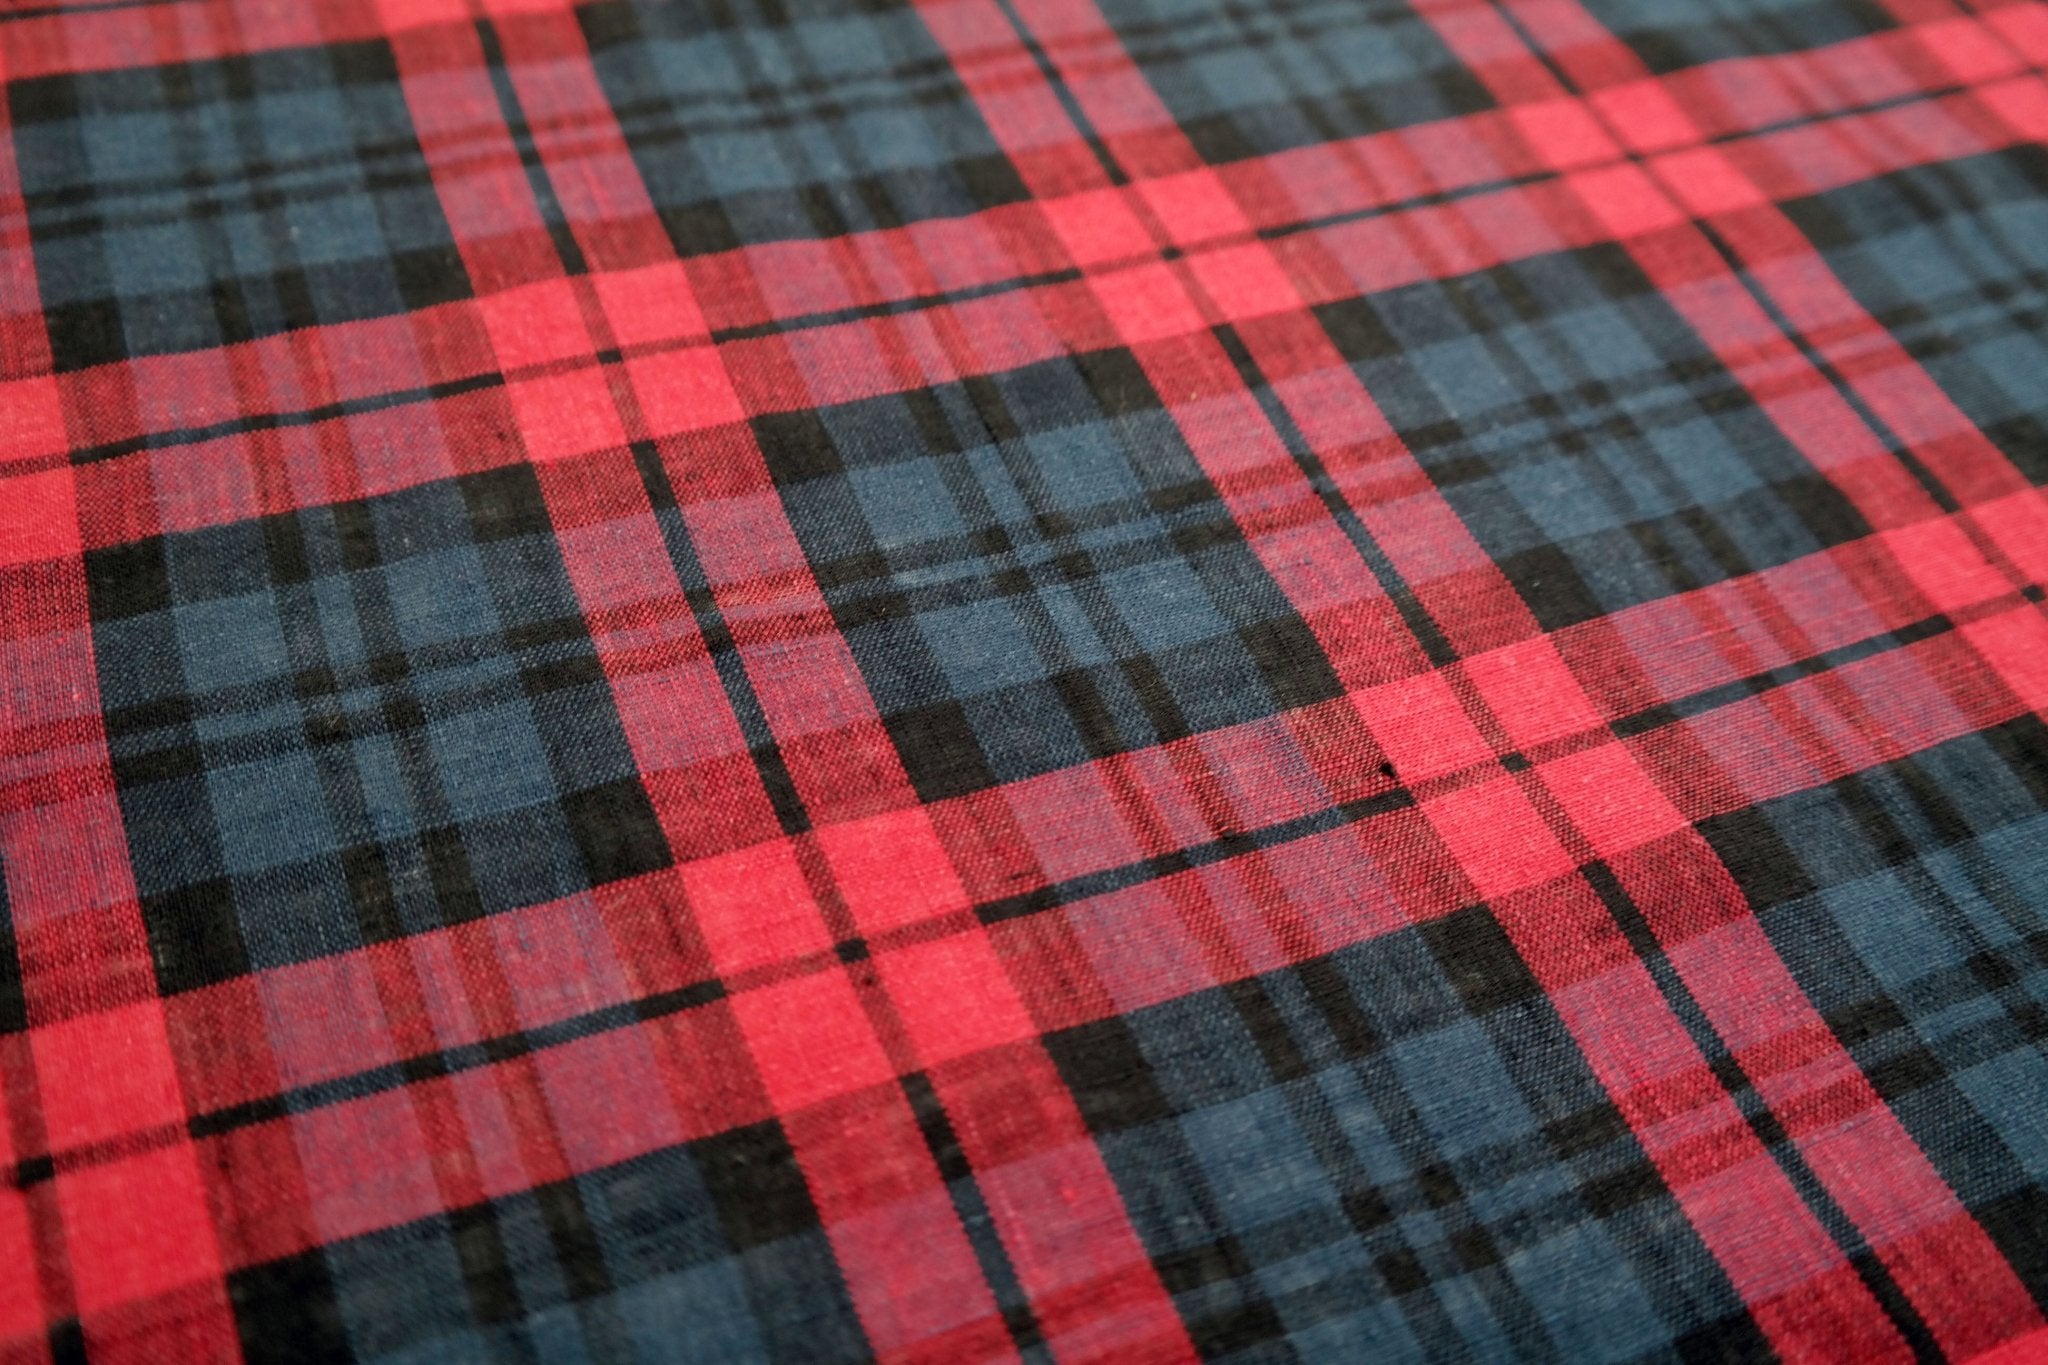 100% Linen Fabric Red Madras Plaid Check Light Weight 7289 - The Linen Lab - Red check 7289